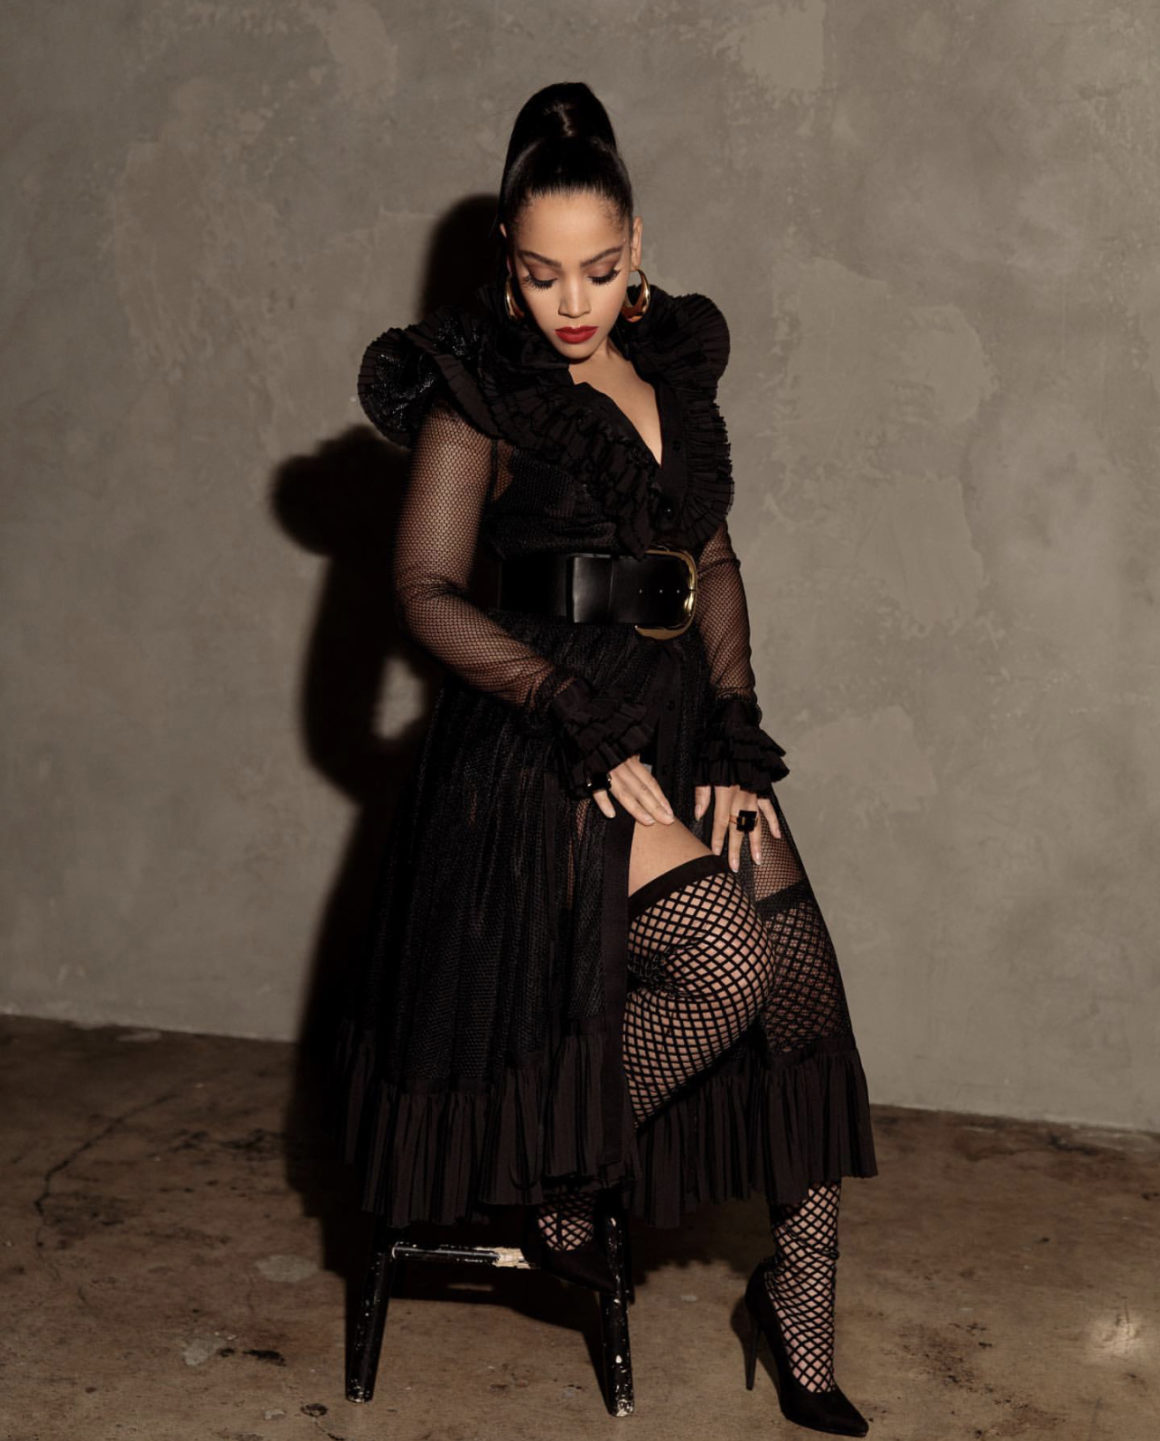 Bianca Lawson Posed for a Shoot Wearing UNTTLD Black Ruffled Fishnet Mesh Dress With Berna Peci Gold Hoops and Nasty Gal Accessories2